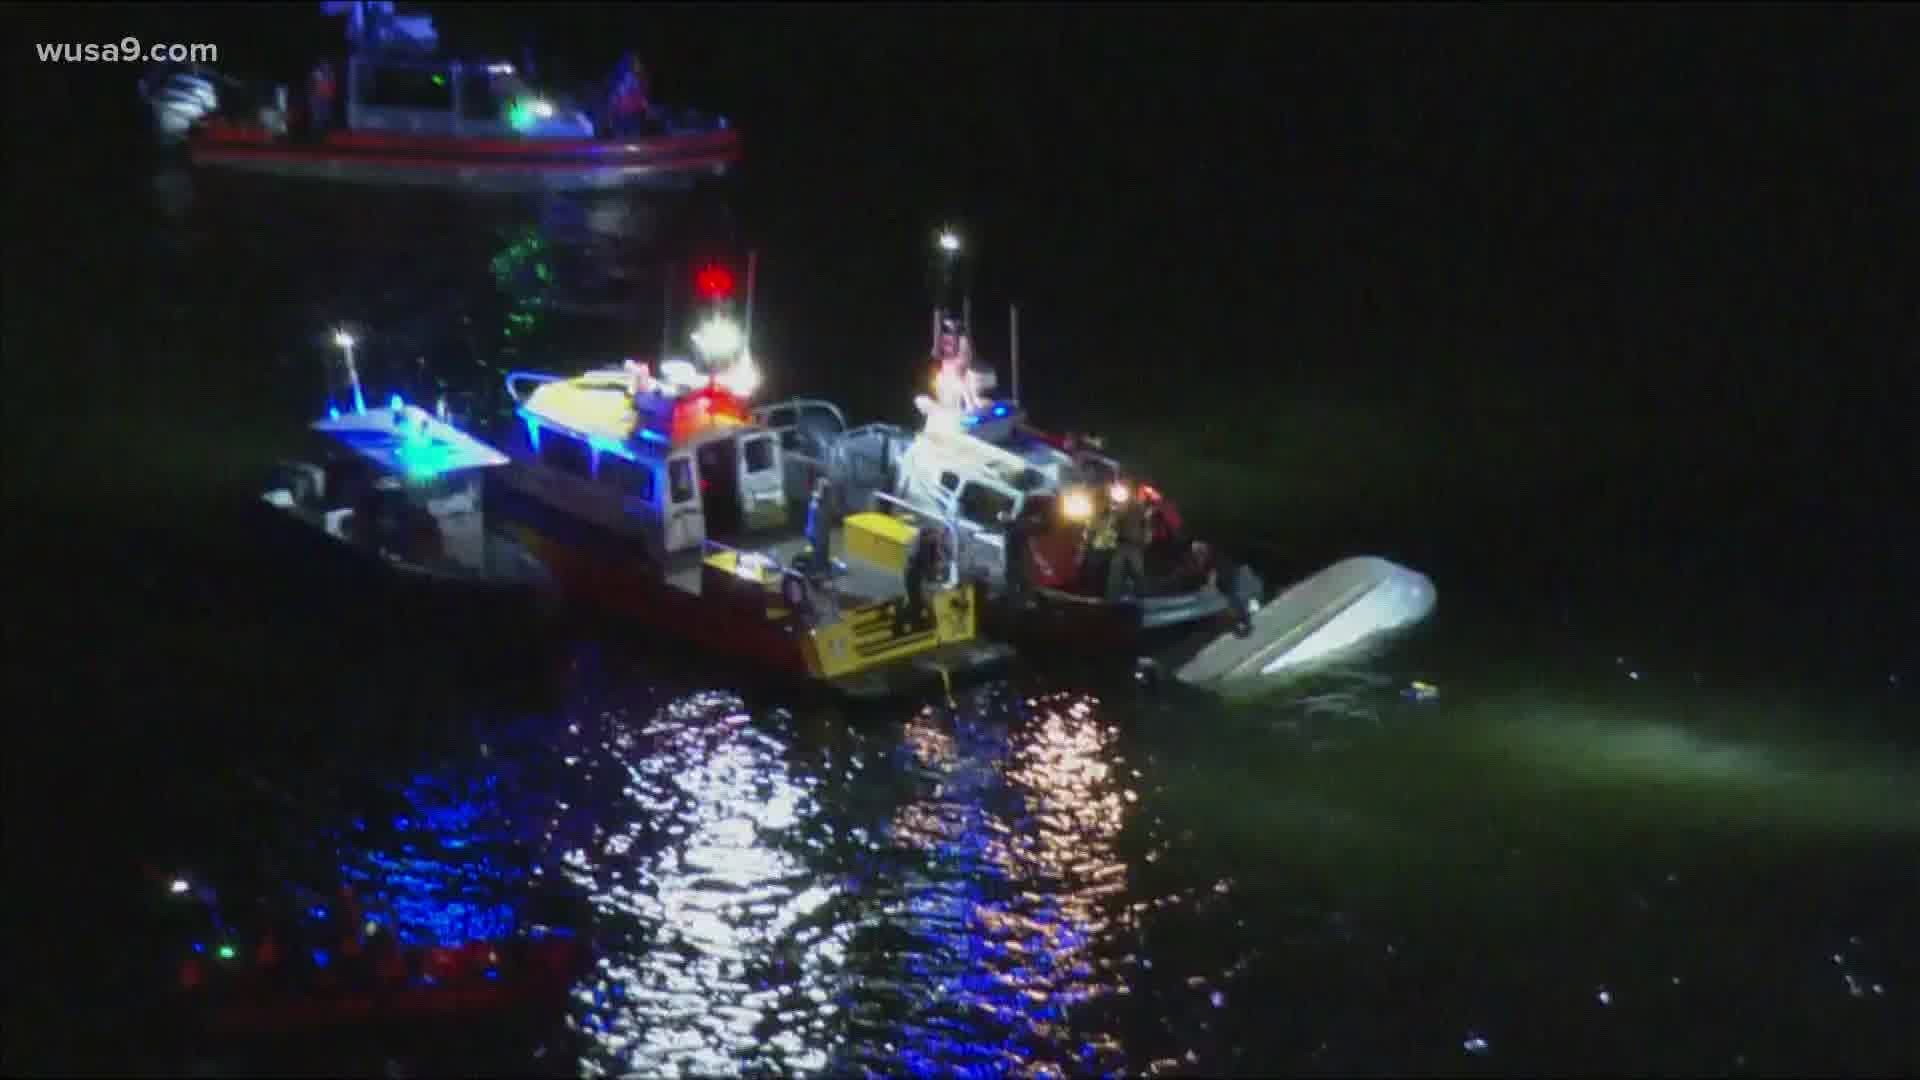 Four people have been rescued after their boat overturned near the Bay Bridge, officials say.